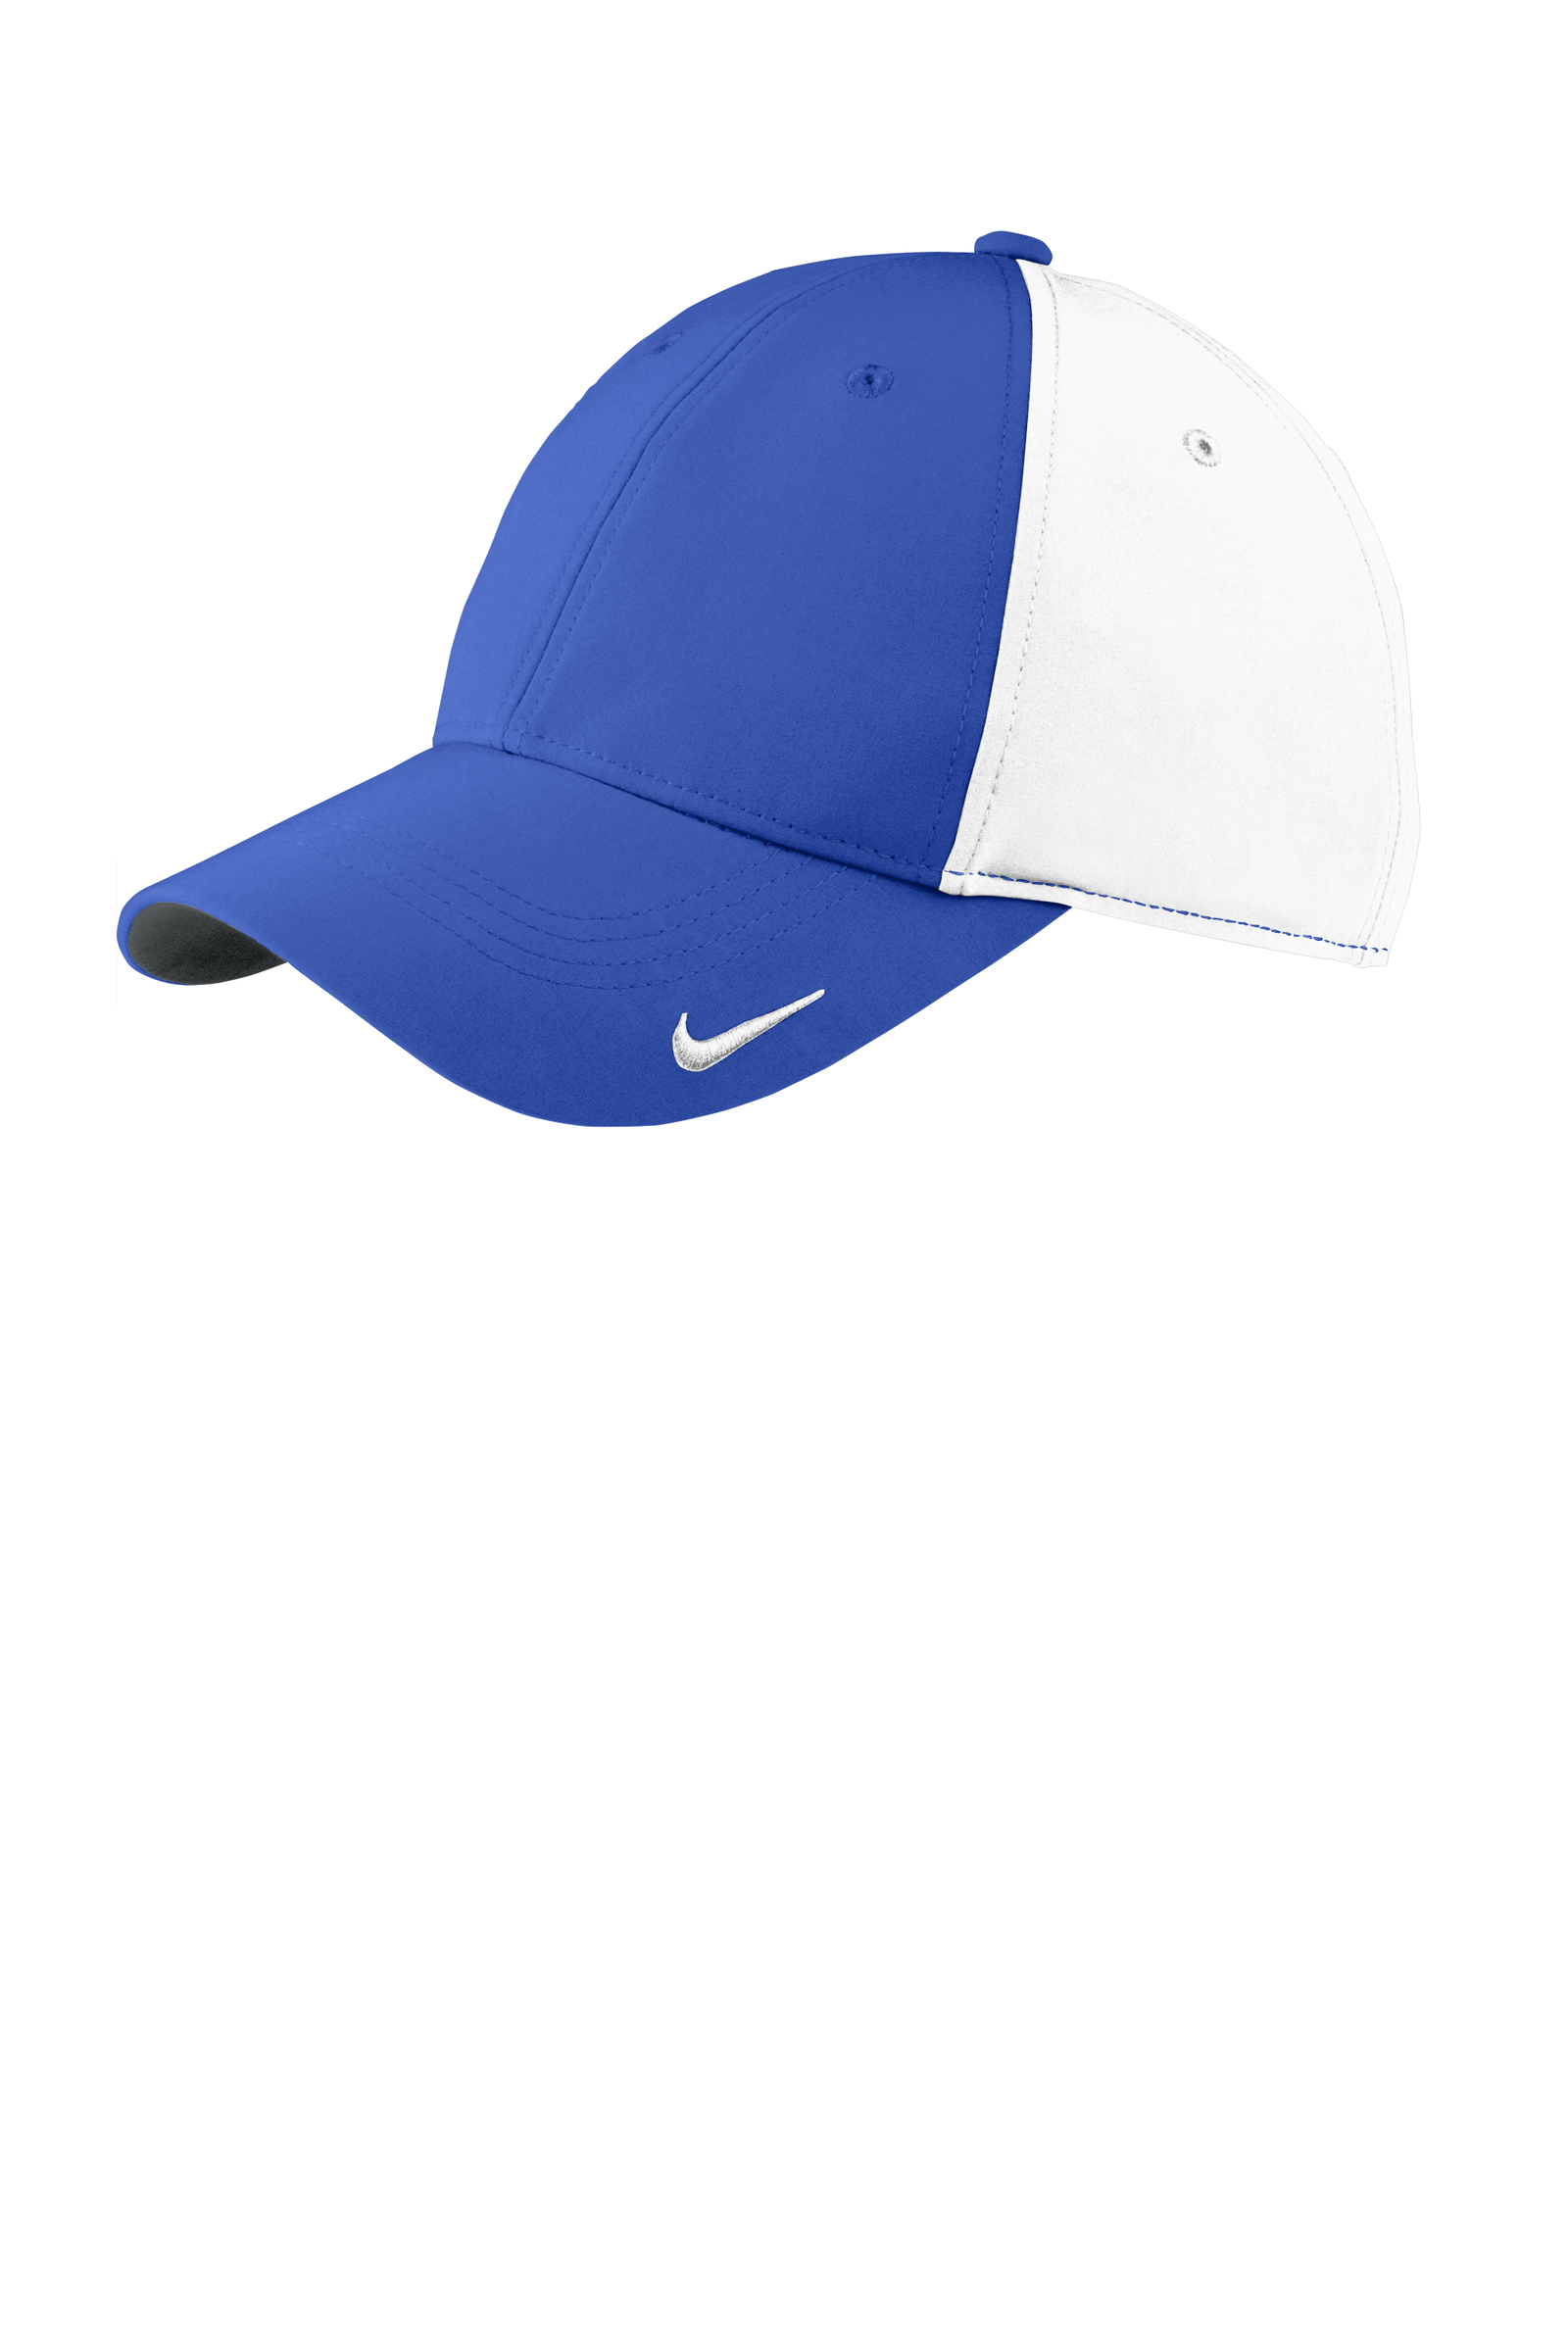 Nike Embroidered Swoosh Legacy 91 Hat